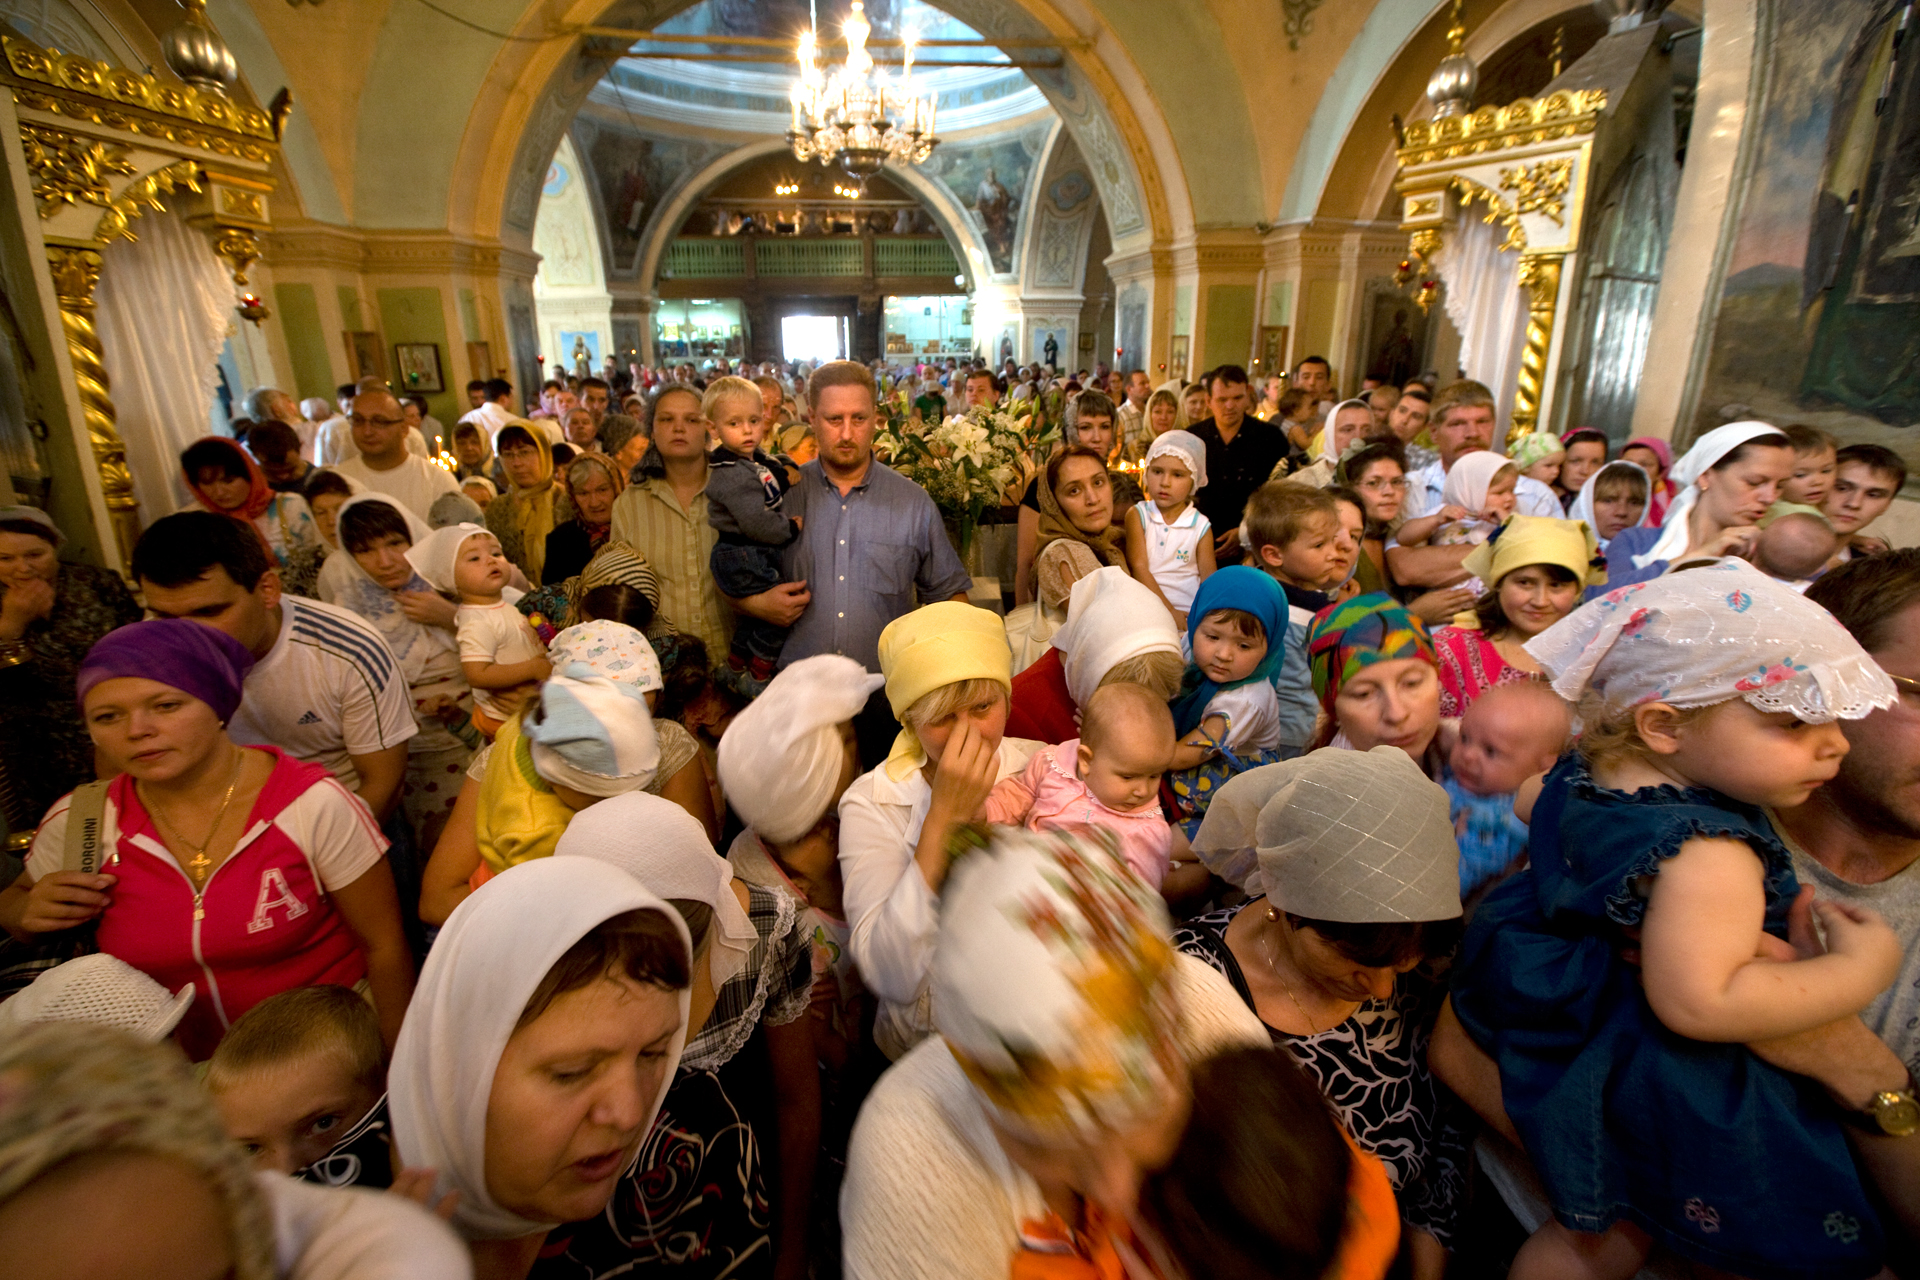  New generations of believers pack into the ornate spaces of Znamensky Cathedral for the feast day of the Transfiguration.  Tyumen, Russia  